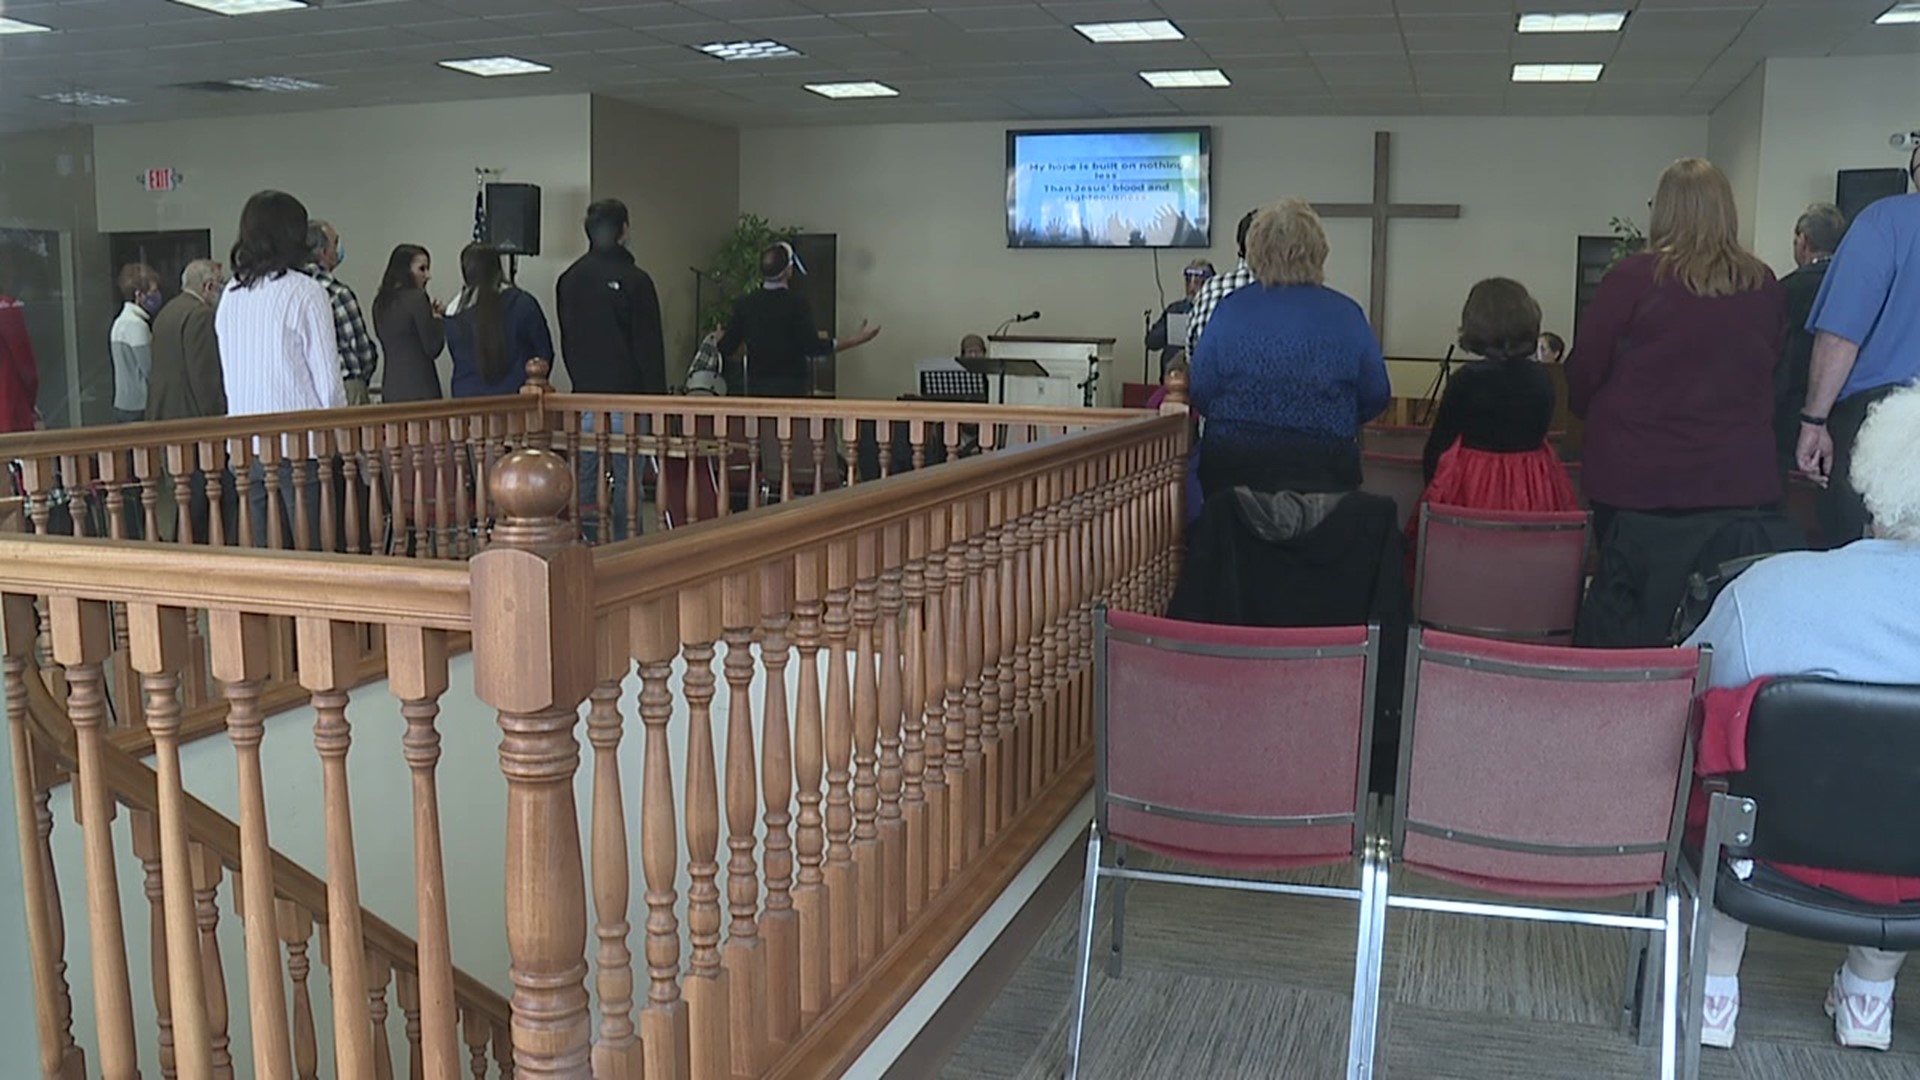 An old car dealership in Lackawanna County has now been converted into a place of worship for parishioners of the Cornerstone Alliance Church.